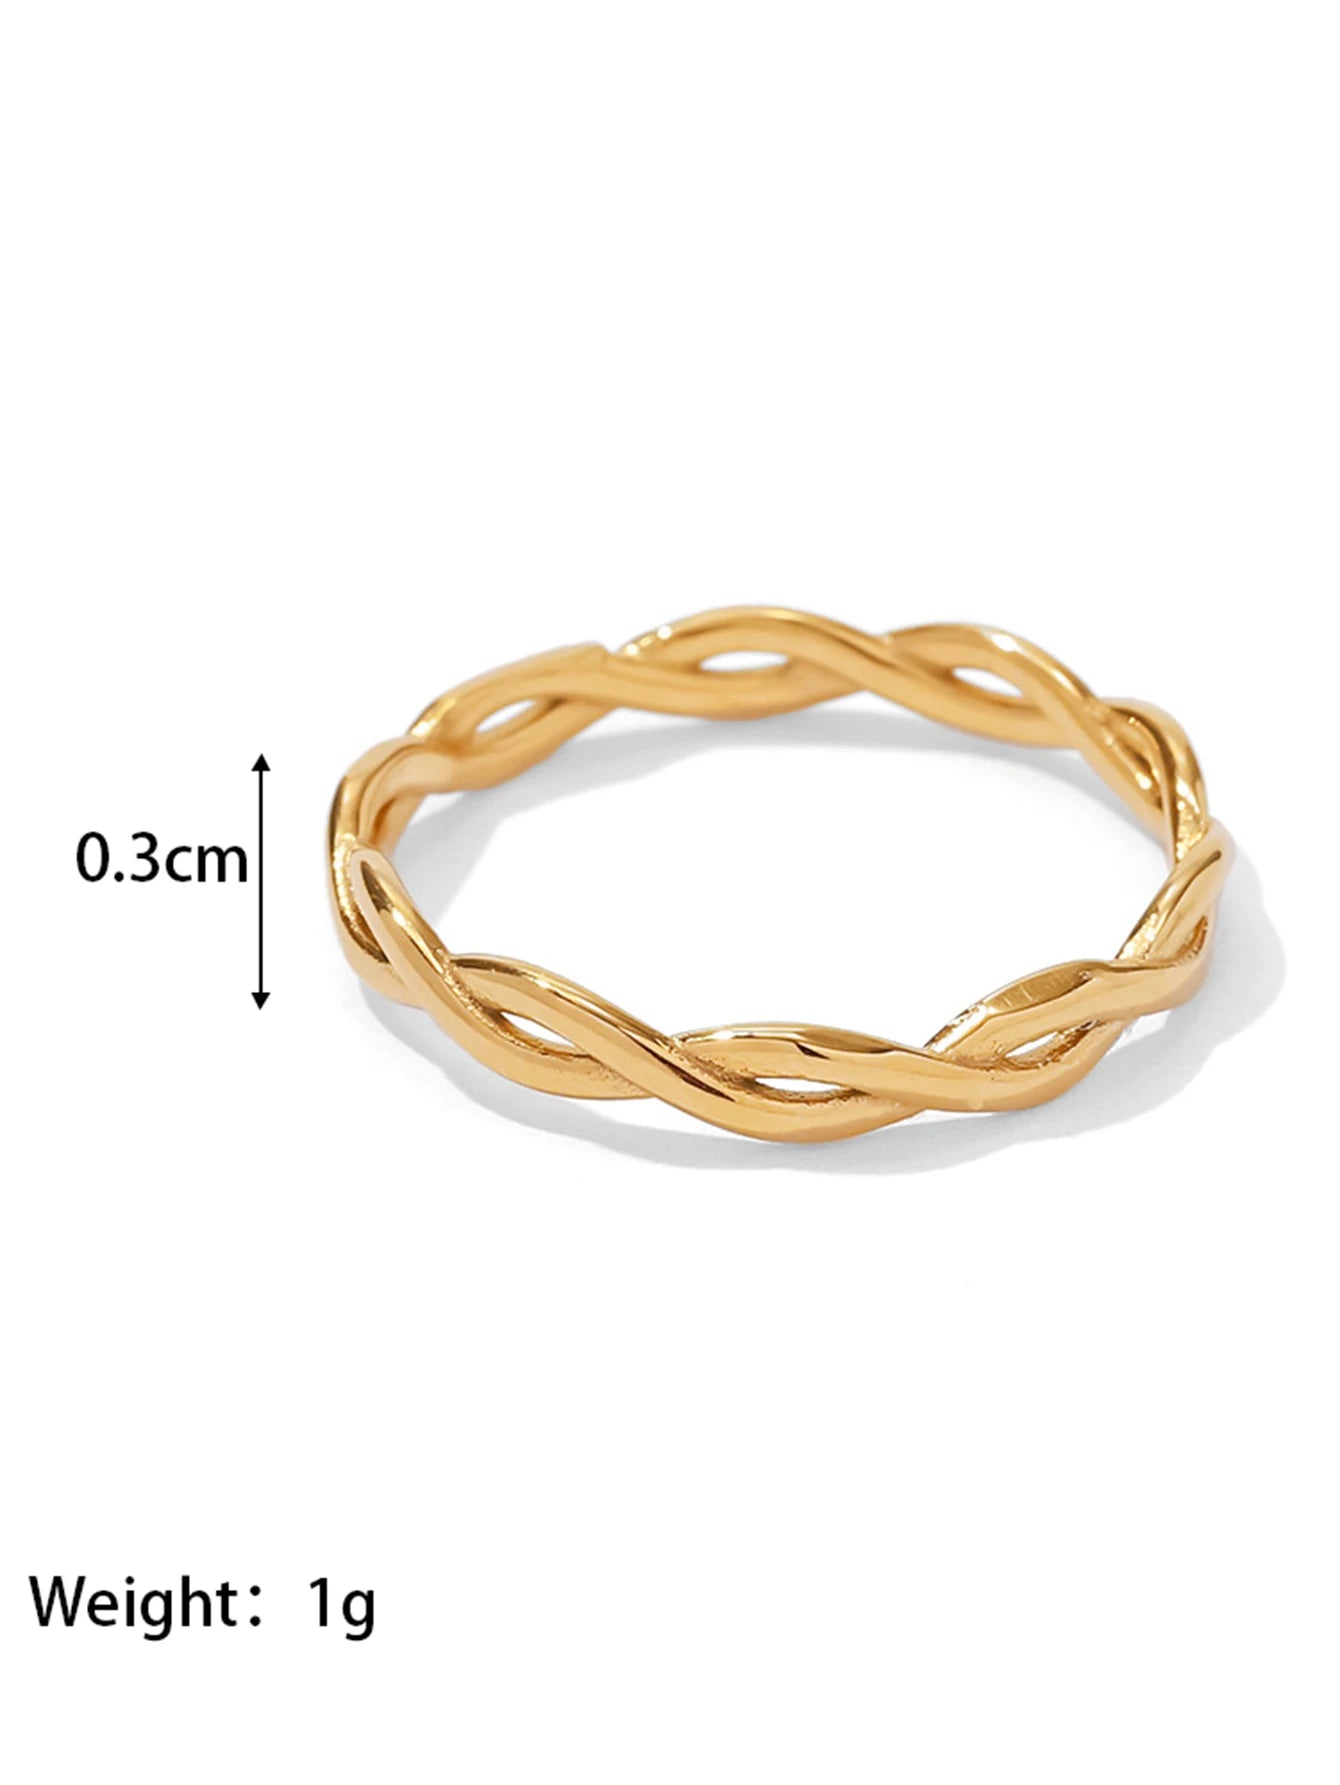 TEEK - 18K Gold PVD Plated 316L Stainless Steel Rings JEWELRY theteekdotcom JDR202154 8 